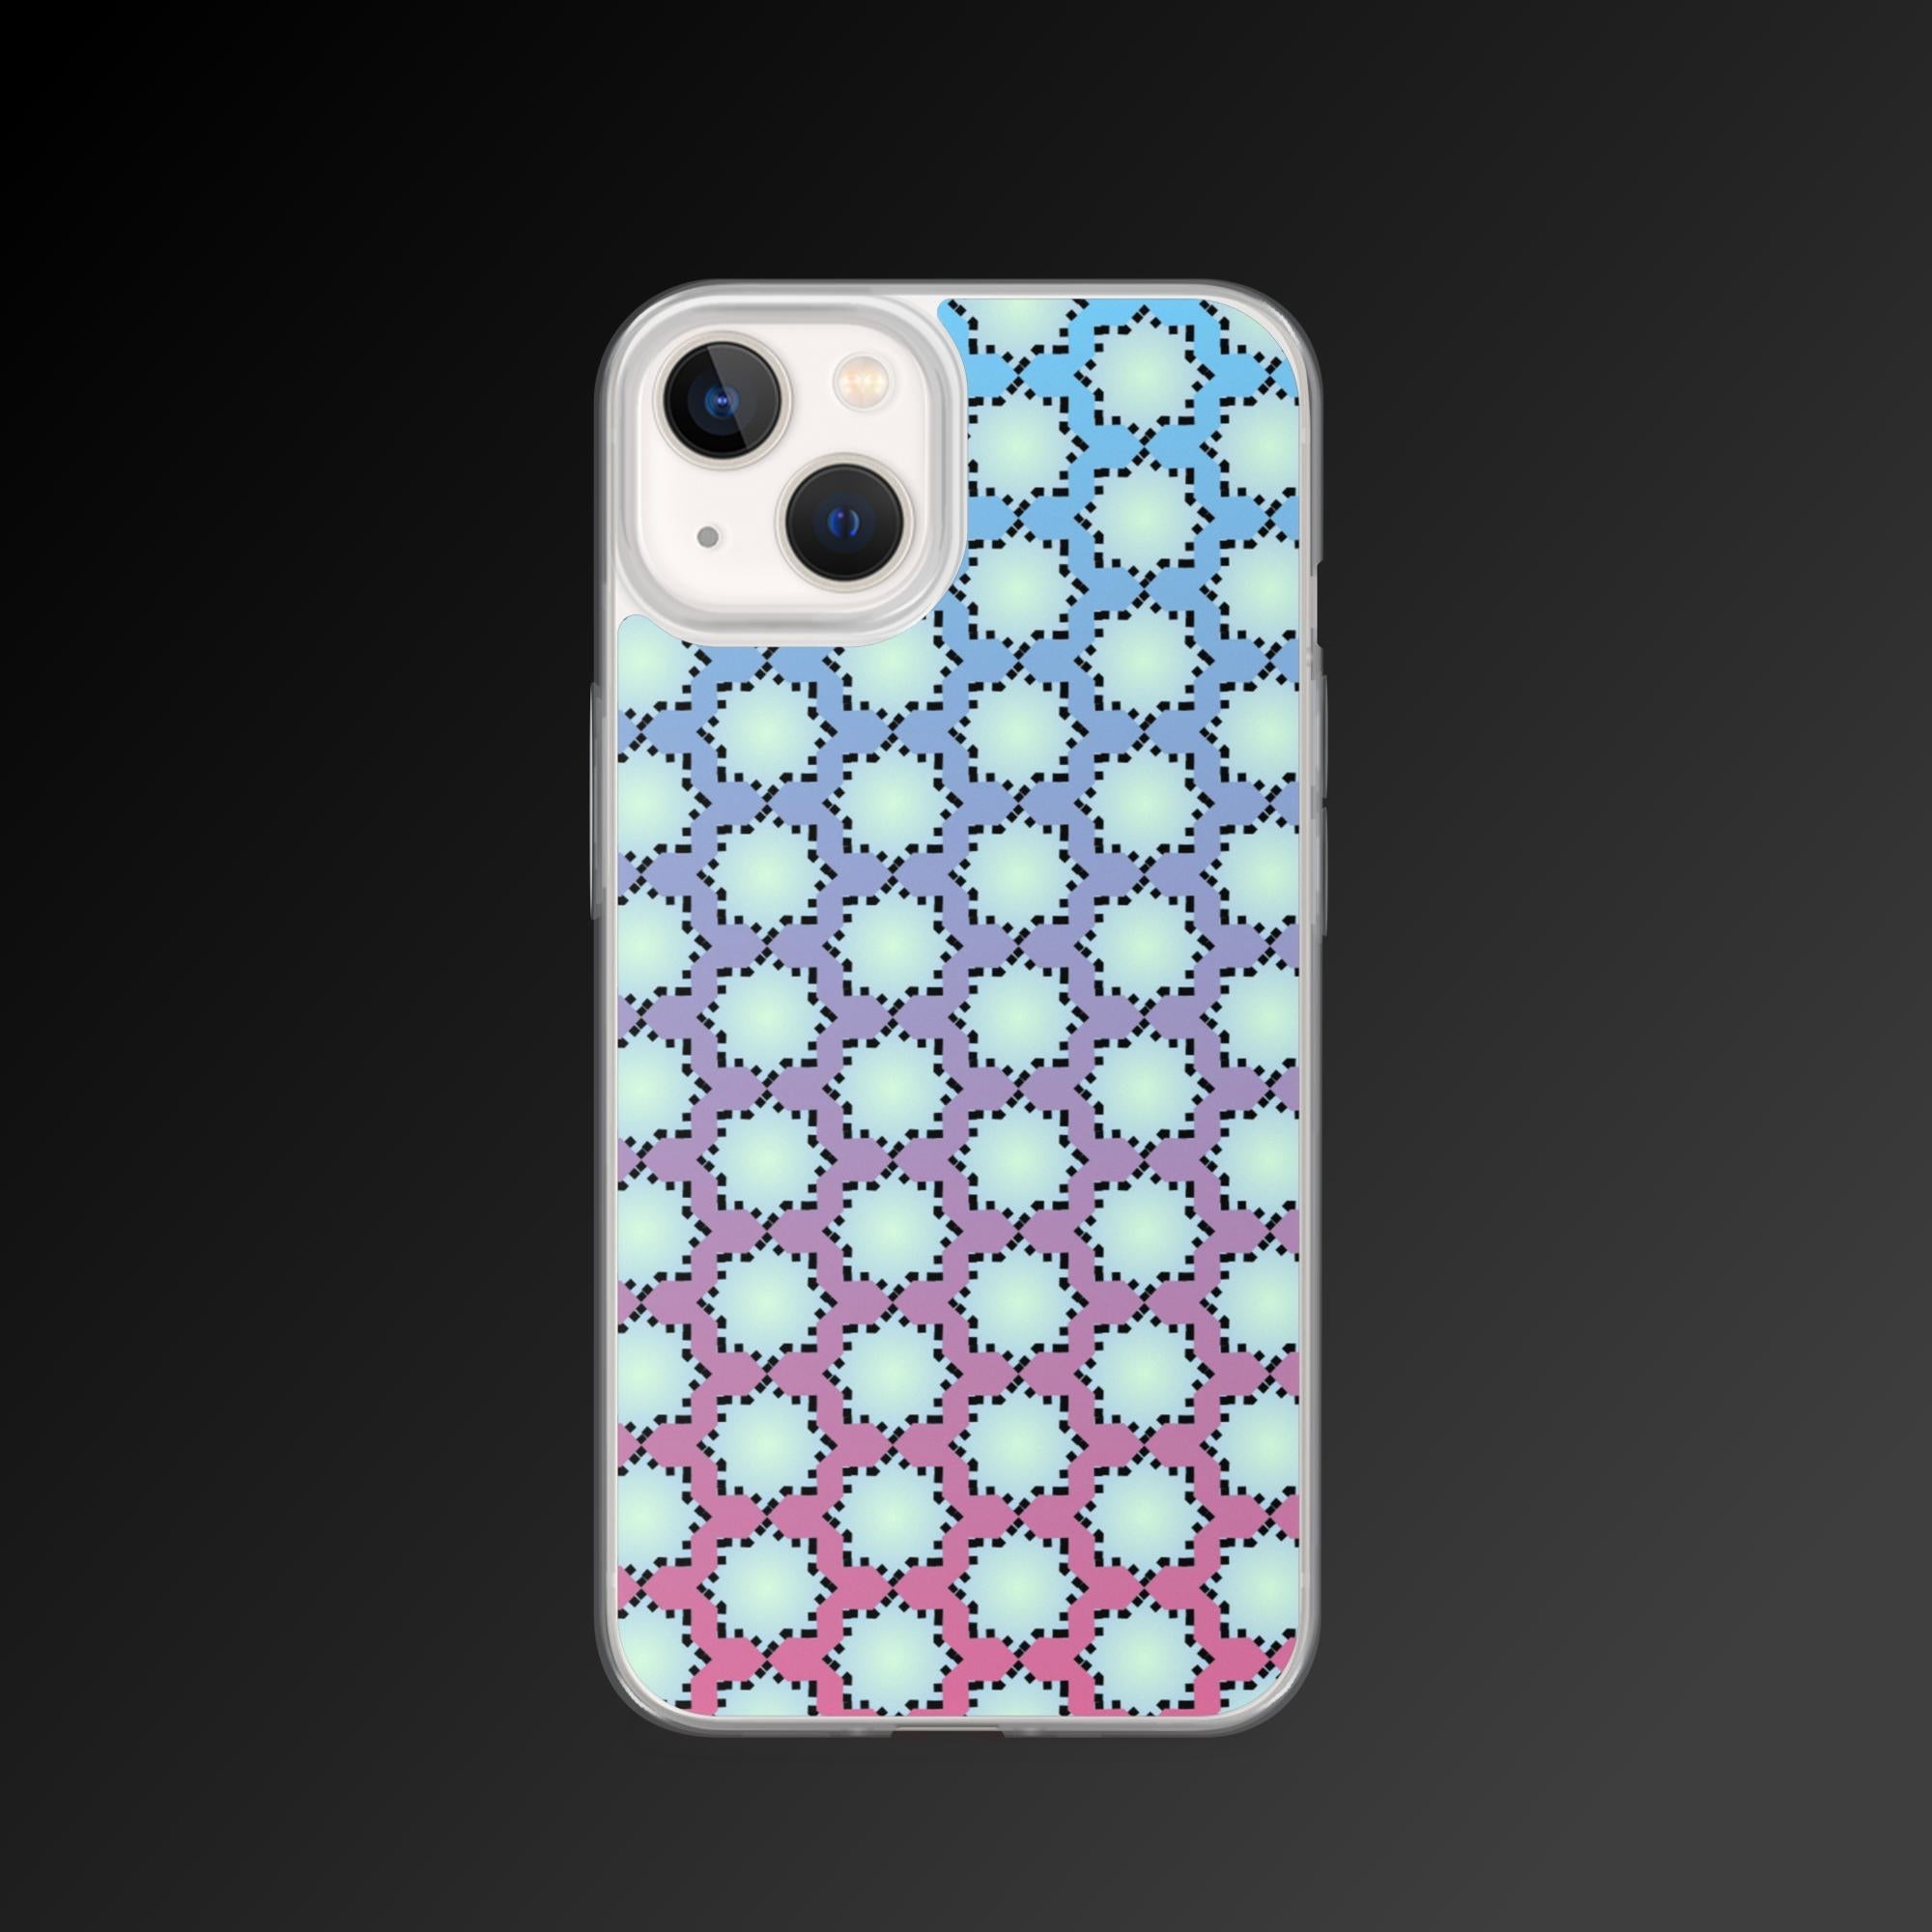 "Light flakes pattern" clear iphone case - Clear iphone case - Ever colorful